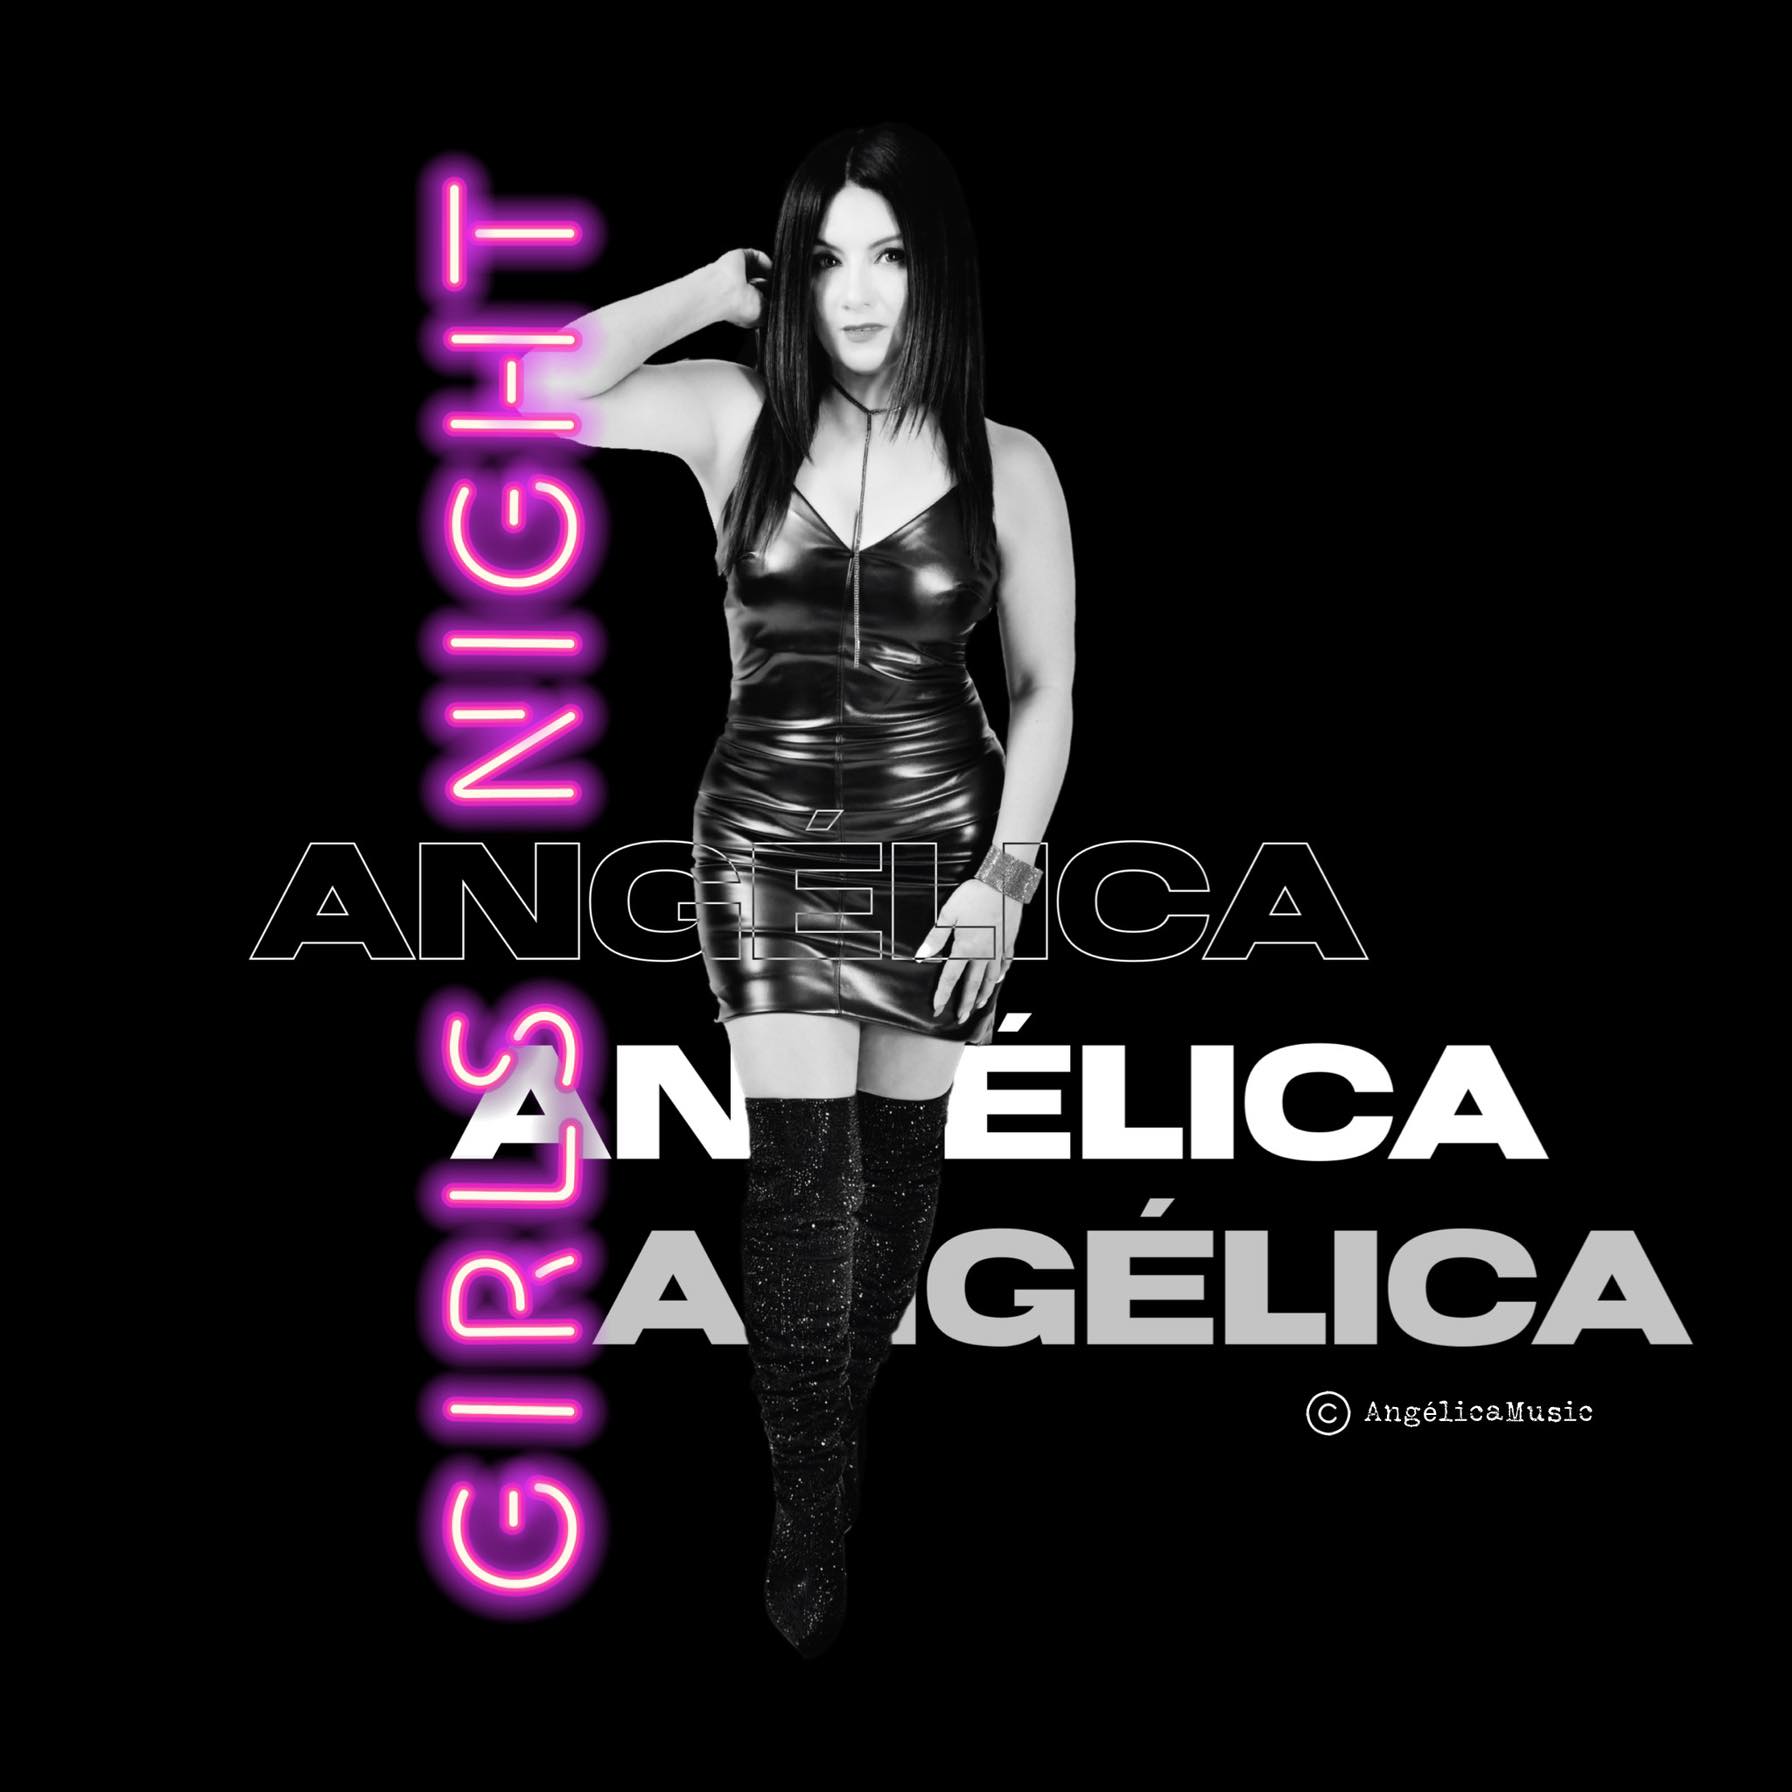 Art for Vuelve by Angelica